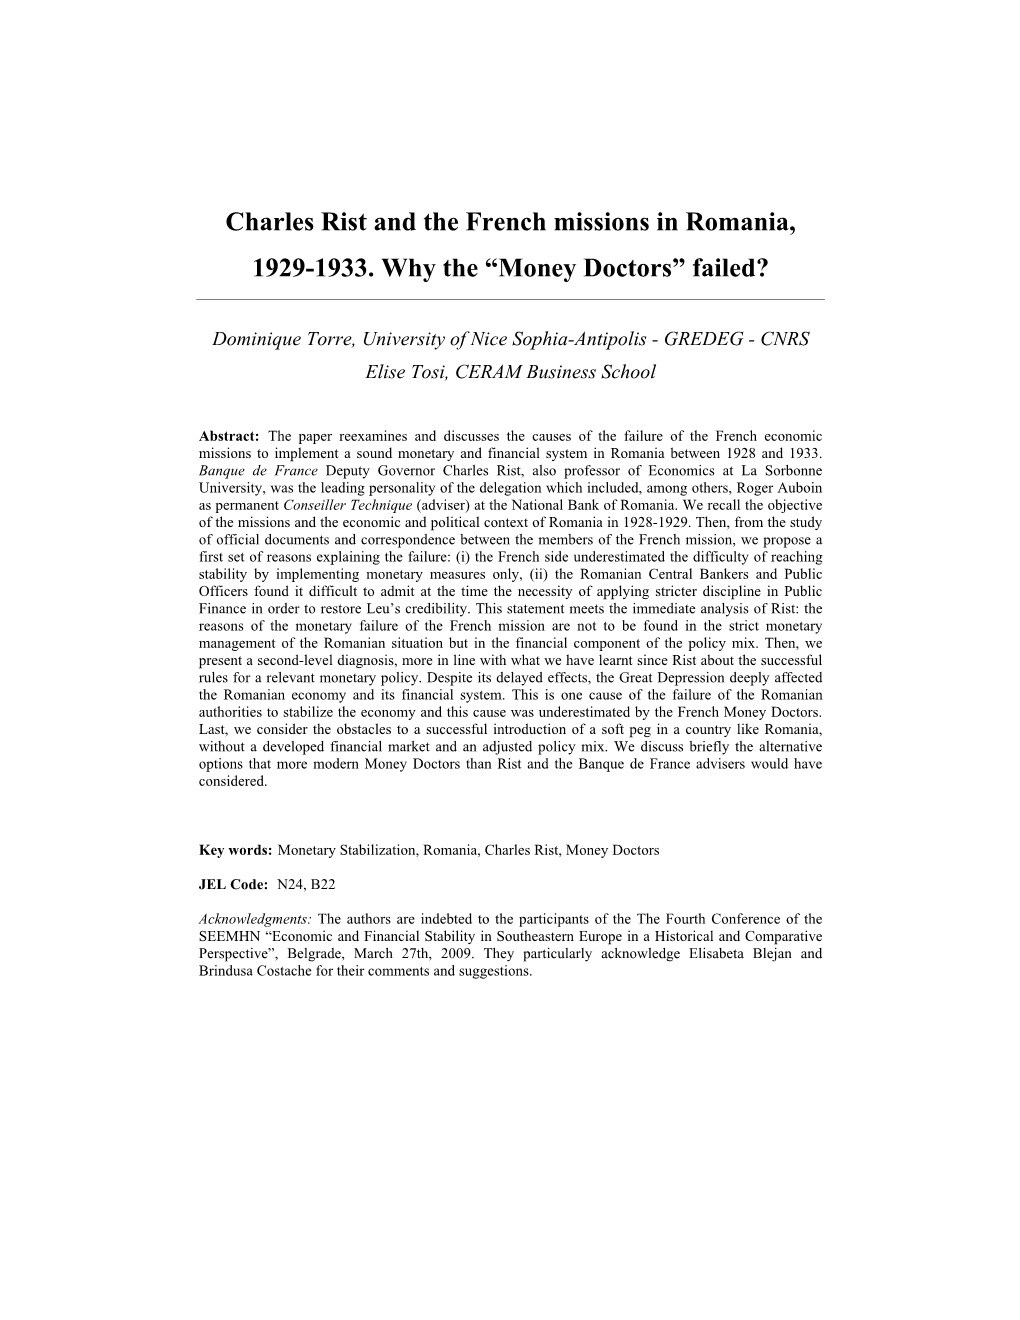 Charles Rist and the French Missions in Romania, 1929-1933. Why the “Money Doctors” Failed?